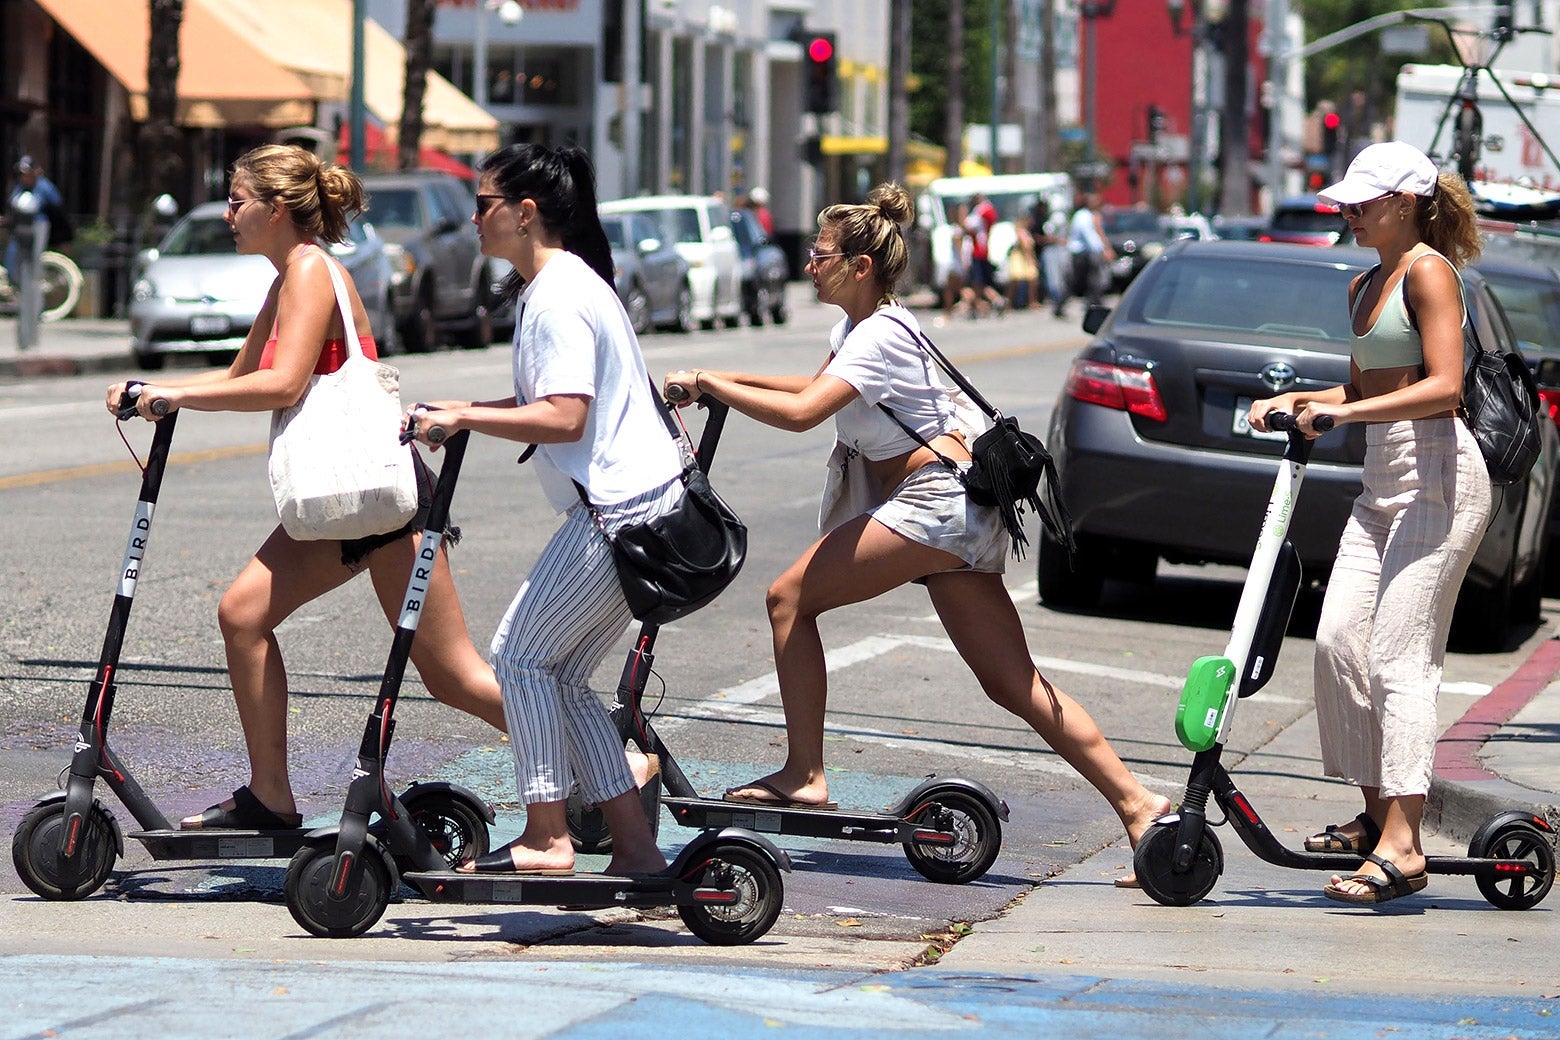 Four women ride e-scooters to cross a city street